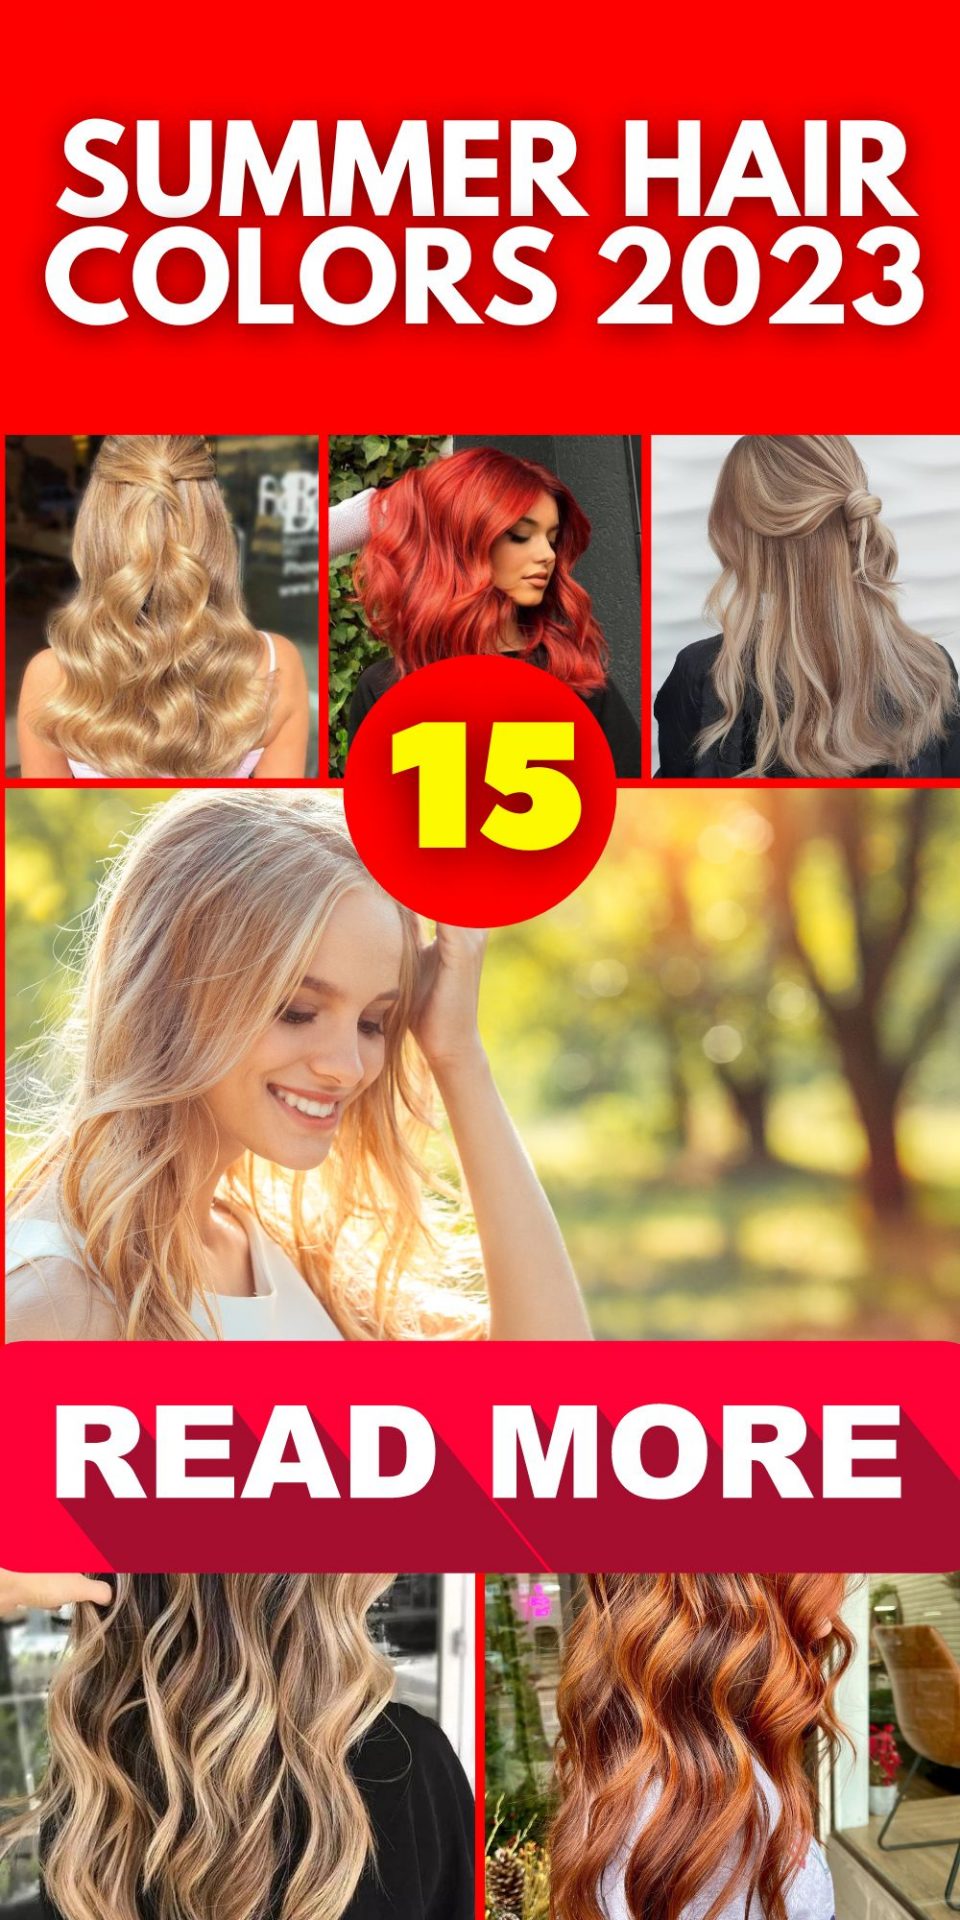 Hot Summer Hair Colors to Spice Up Your Look in 2023 Red, Blonde, and